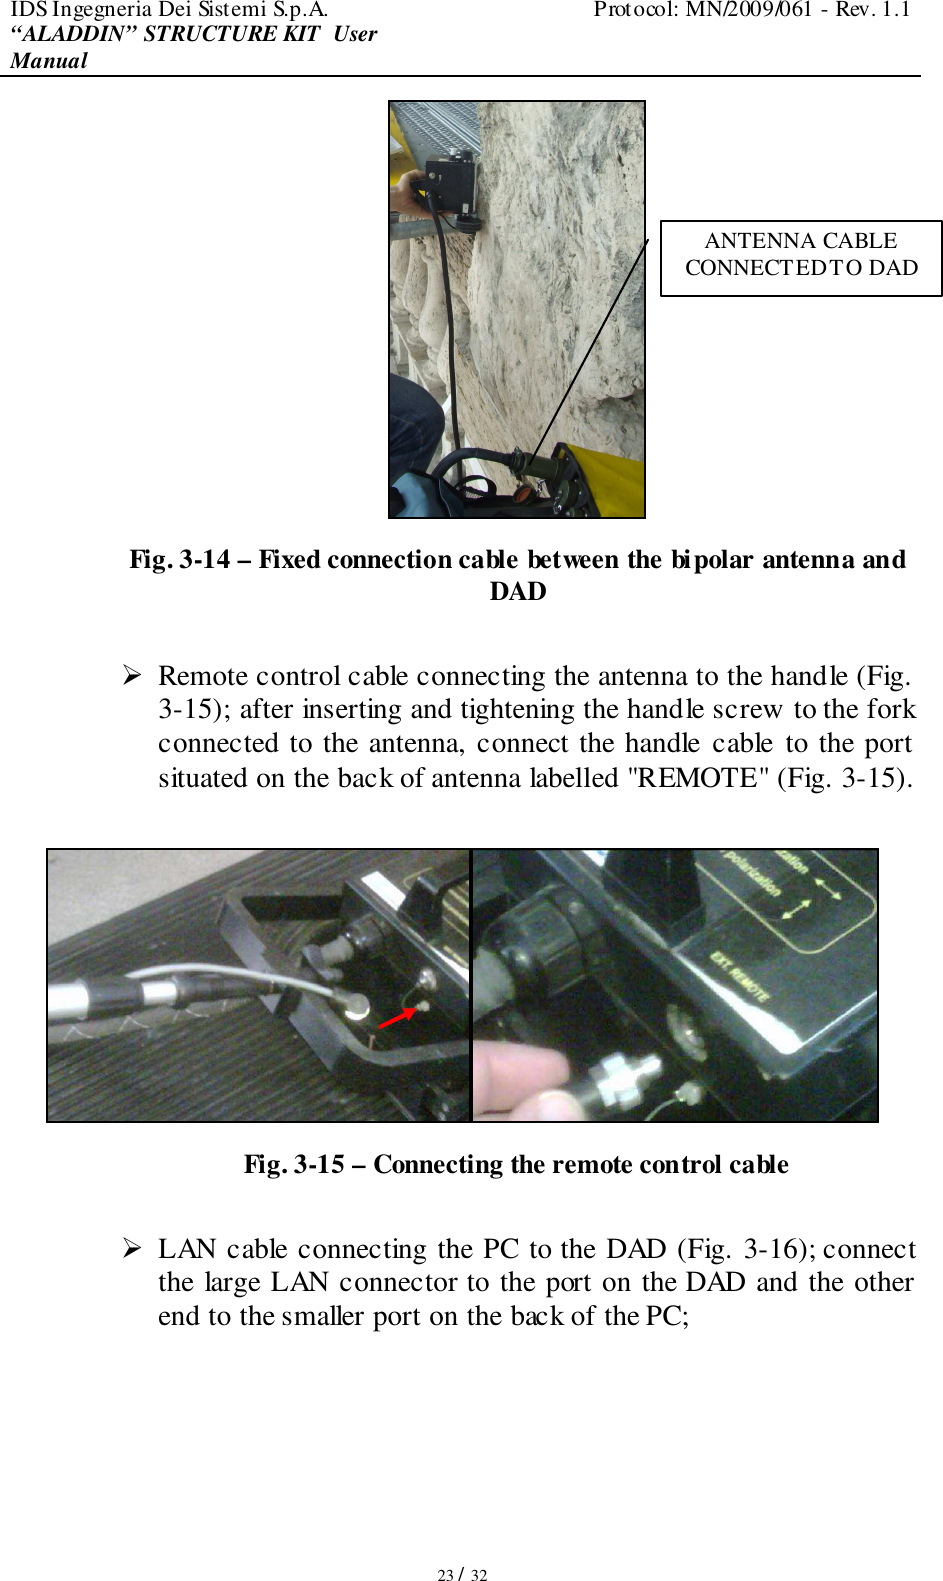 IDS Ingegneria Dei Sistemi S.p.A.  Protocol: MN/2009/061 - Rev. 1.1 “ALADDIN” STRUCTURE KIT  User Manual   23 / 32  Fig. 3-14 – Fixed connection cable between the bipolar antenna and DAD   Remote control cable connecting the antenna to the handle (Fig. 3-15); after inserting and tightening the handle screw to the fork connected to the antenna, connect the handle cable to the port situated on the back of antenna labelled &quot;REMOTE&quot; (Fig. 3-15).   Fig. 3-15 – Connecting the remote control cable   LAN cable connecting the PC to the DAD (Fig. 3-16); connect the large LAN connector to the port on the DAD and the other end to the smaller port on the back of the PC; ANTENNA CABLE CONNECTED TO DAD 